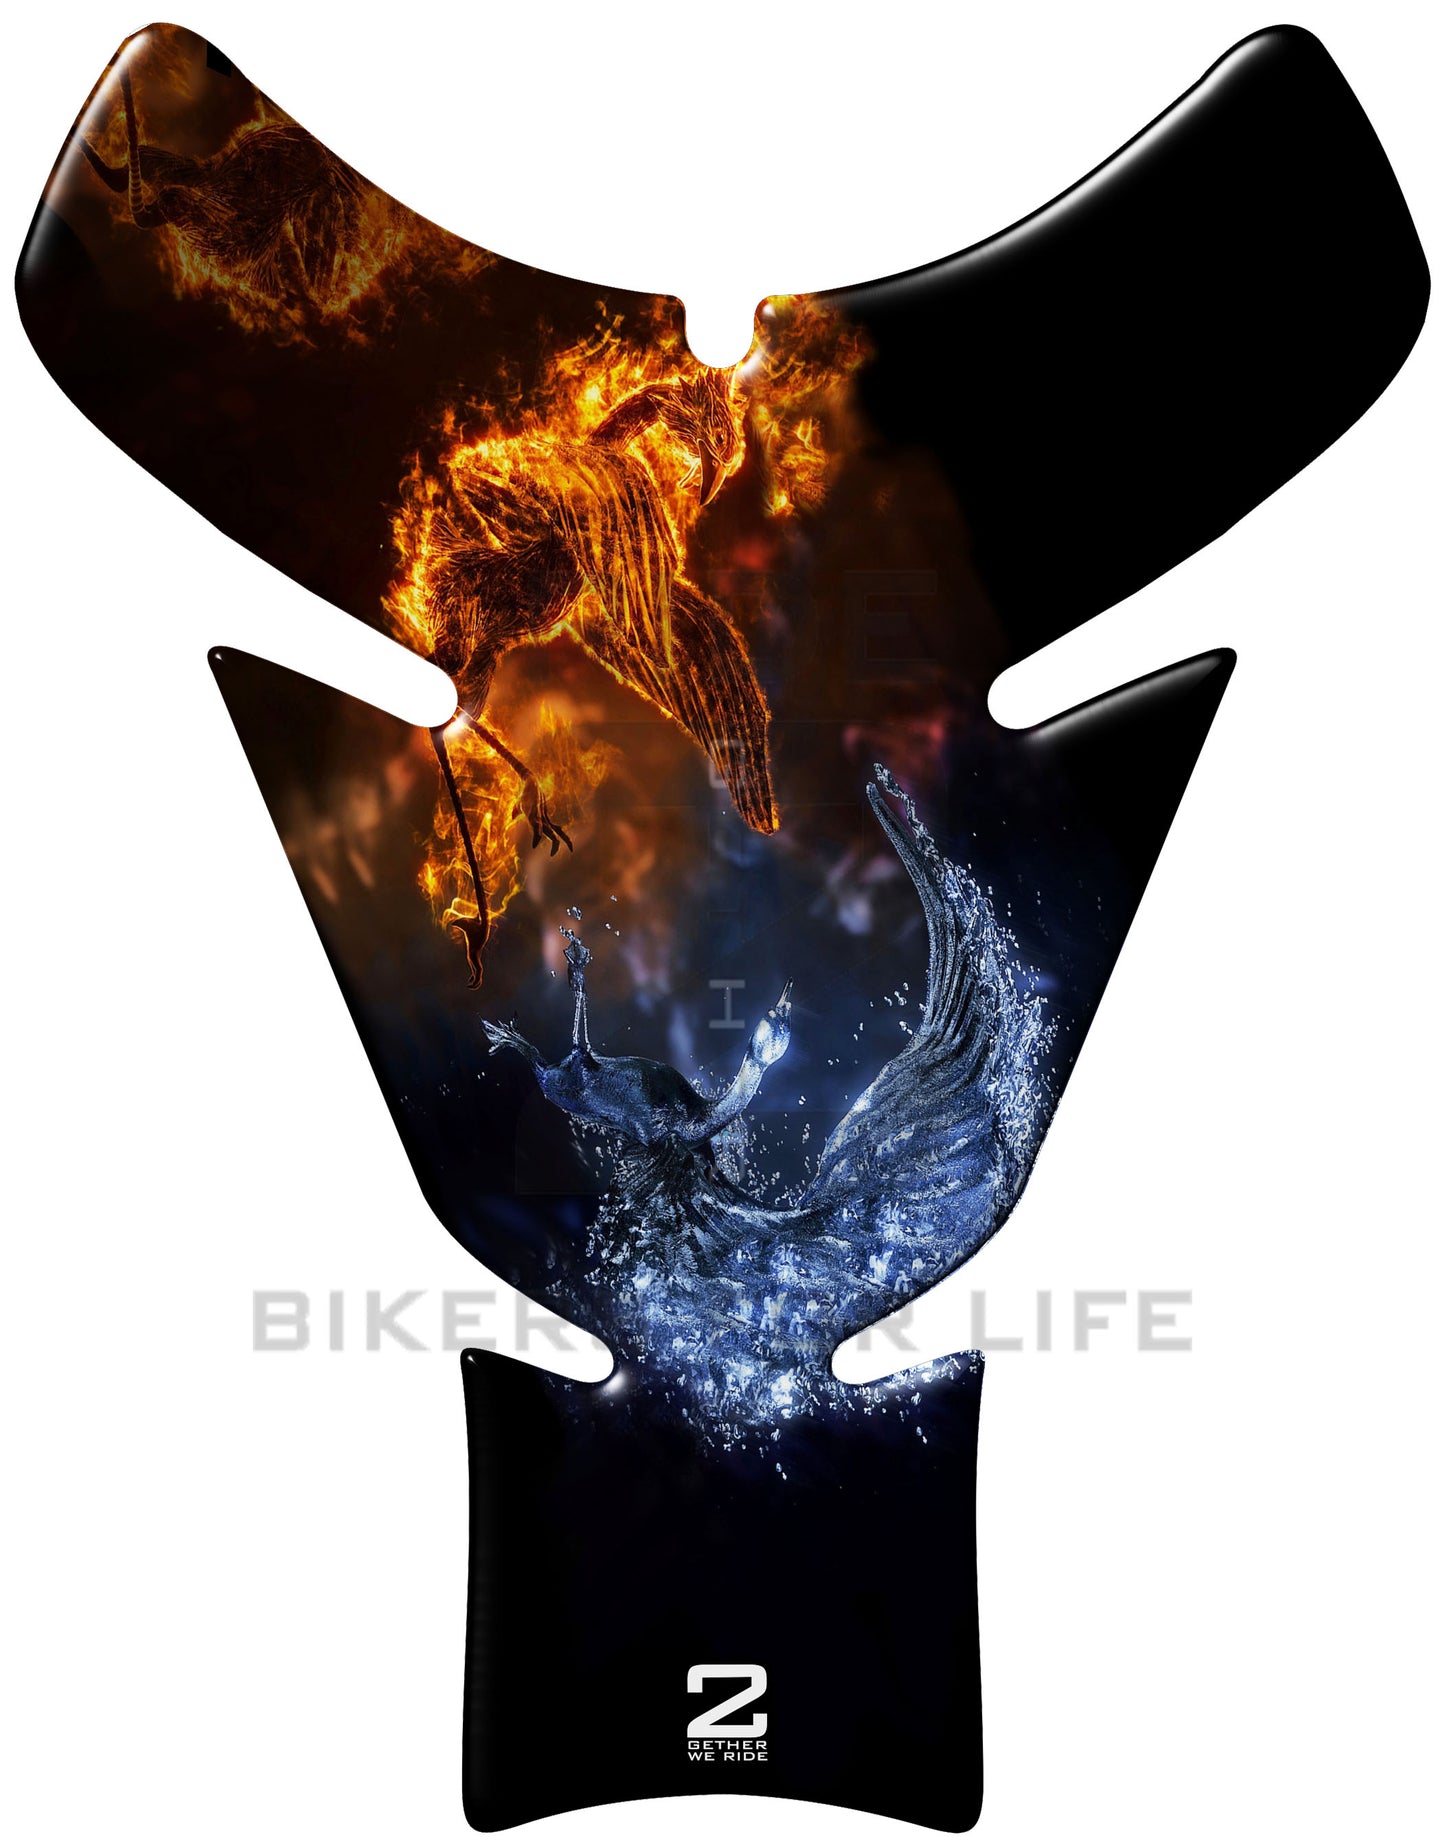 Universal Fit Fire and Ice Flaming Phoenix  and Spiritual Swan Motor Bike Tank Pad Protector. A Street Pad which fits most motorcycles.